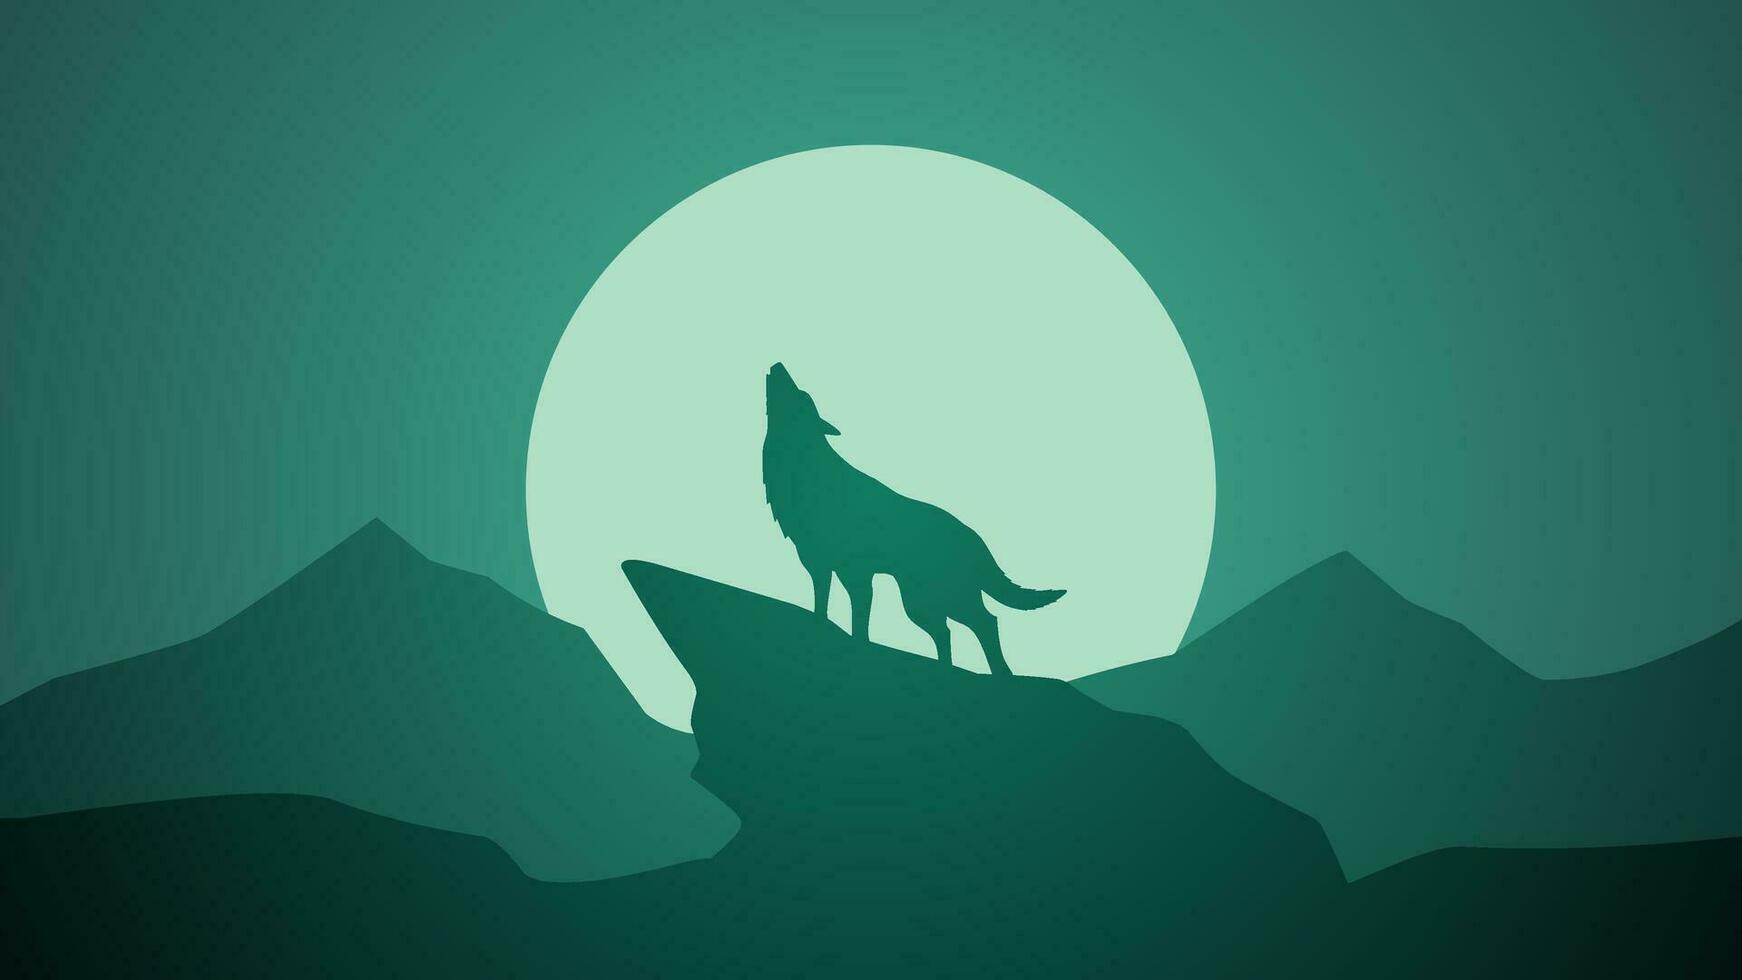 Wildlife wolf landscape vector illustration. Silhouette of wolf howling at full moon night. Wildlife wolf landscape for illustration, background or wallpaper